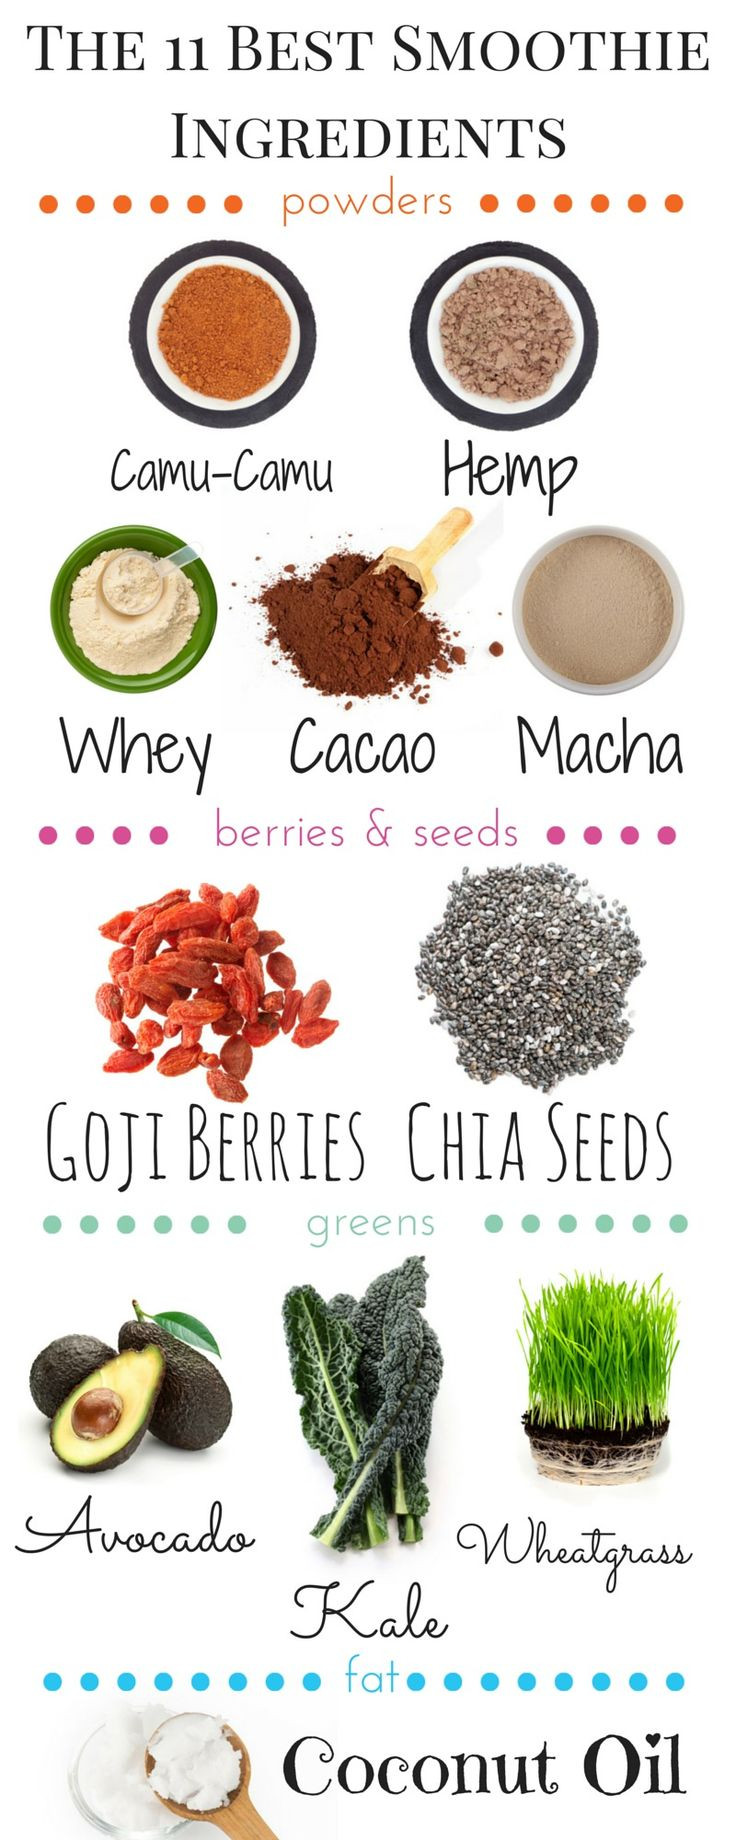 Ingredients For Healthy Smoothies
 40 best images about Protein Shakes on Pinterest